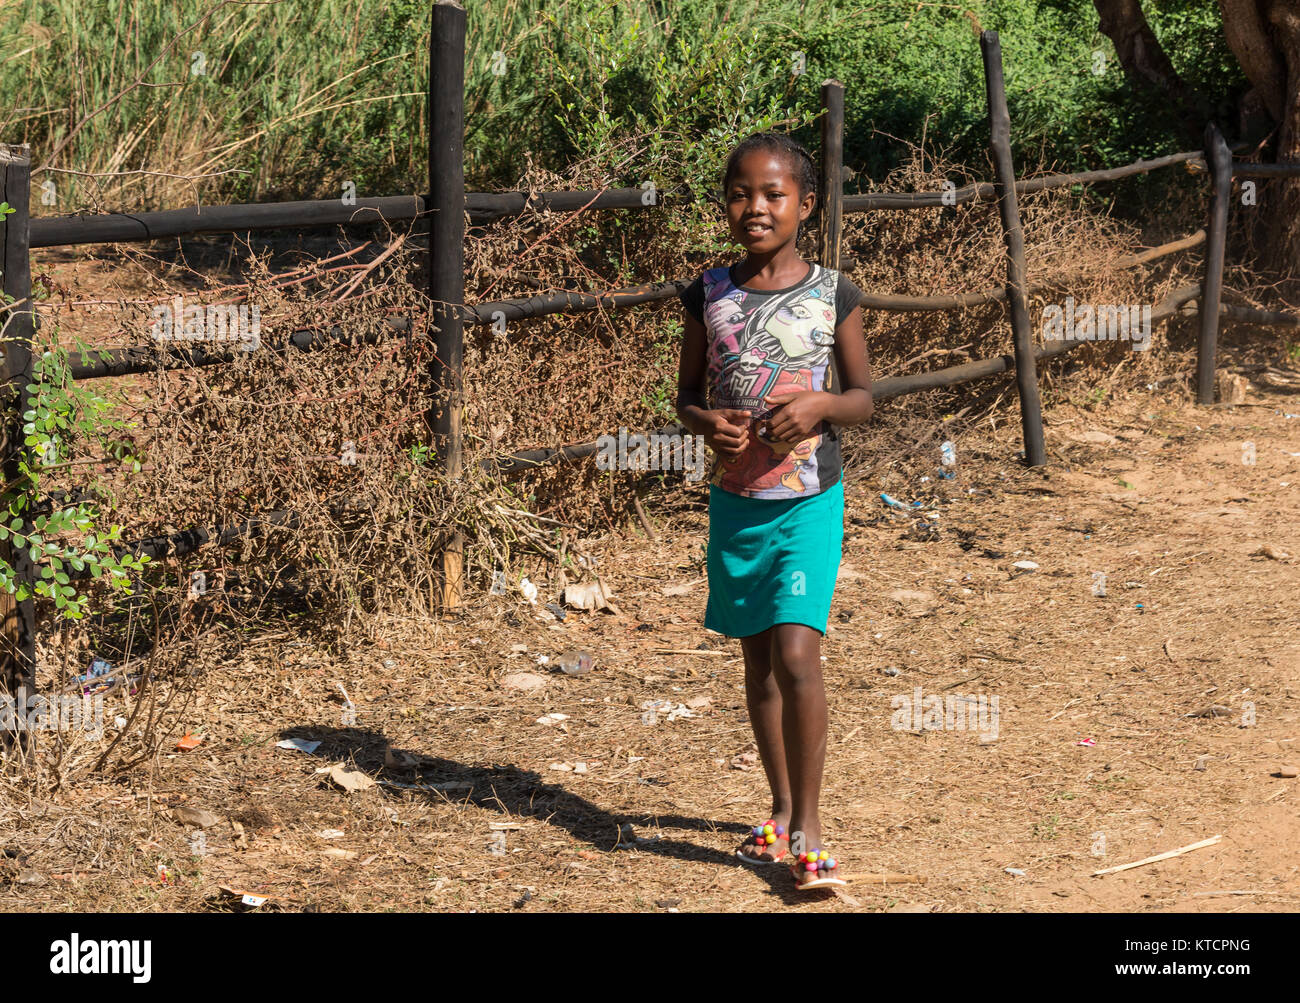 A young Malagasy girl smile on a dirt road in a small village. Madagascar, Africa. Stock Photo